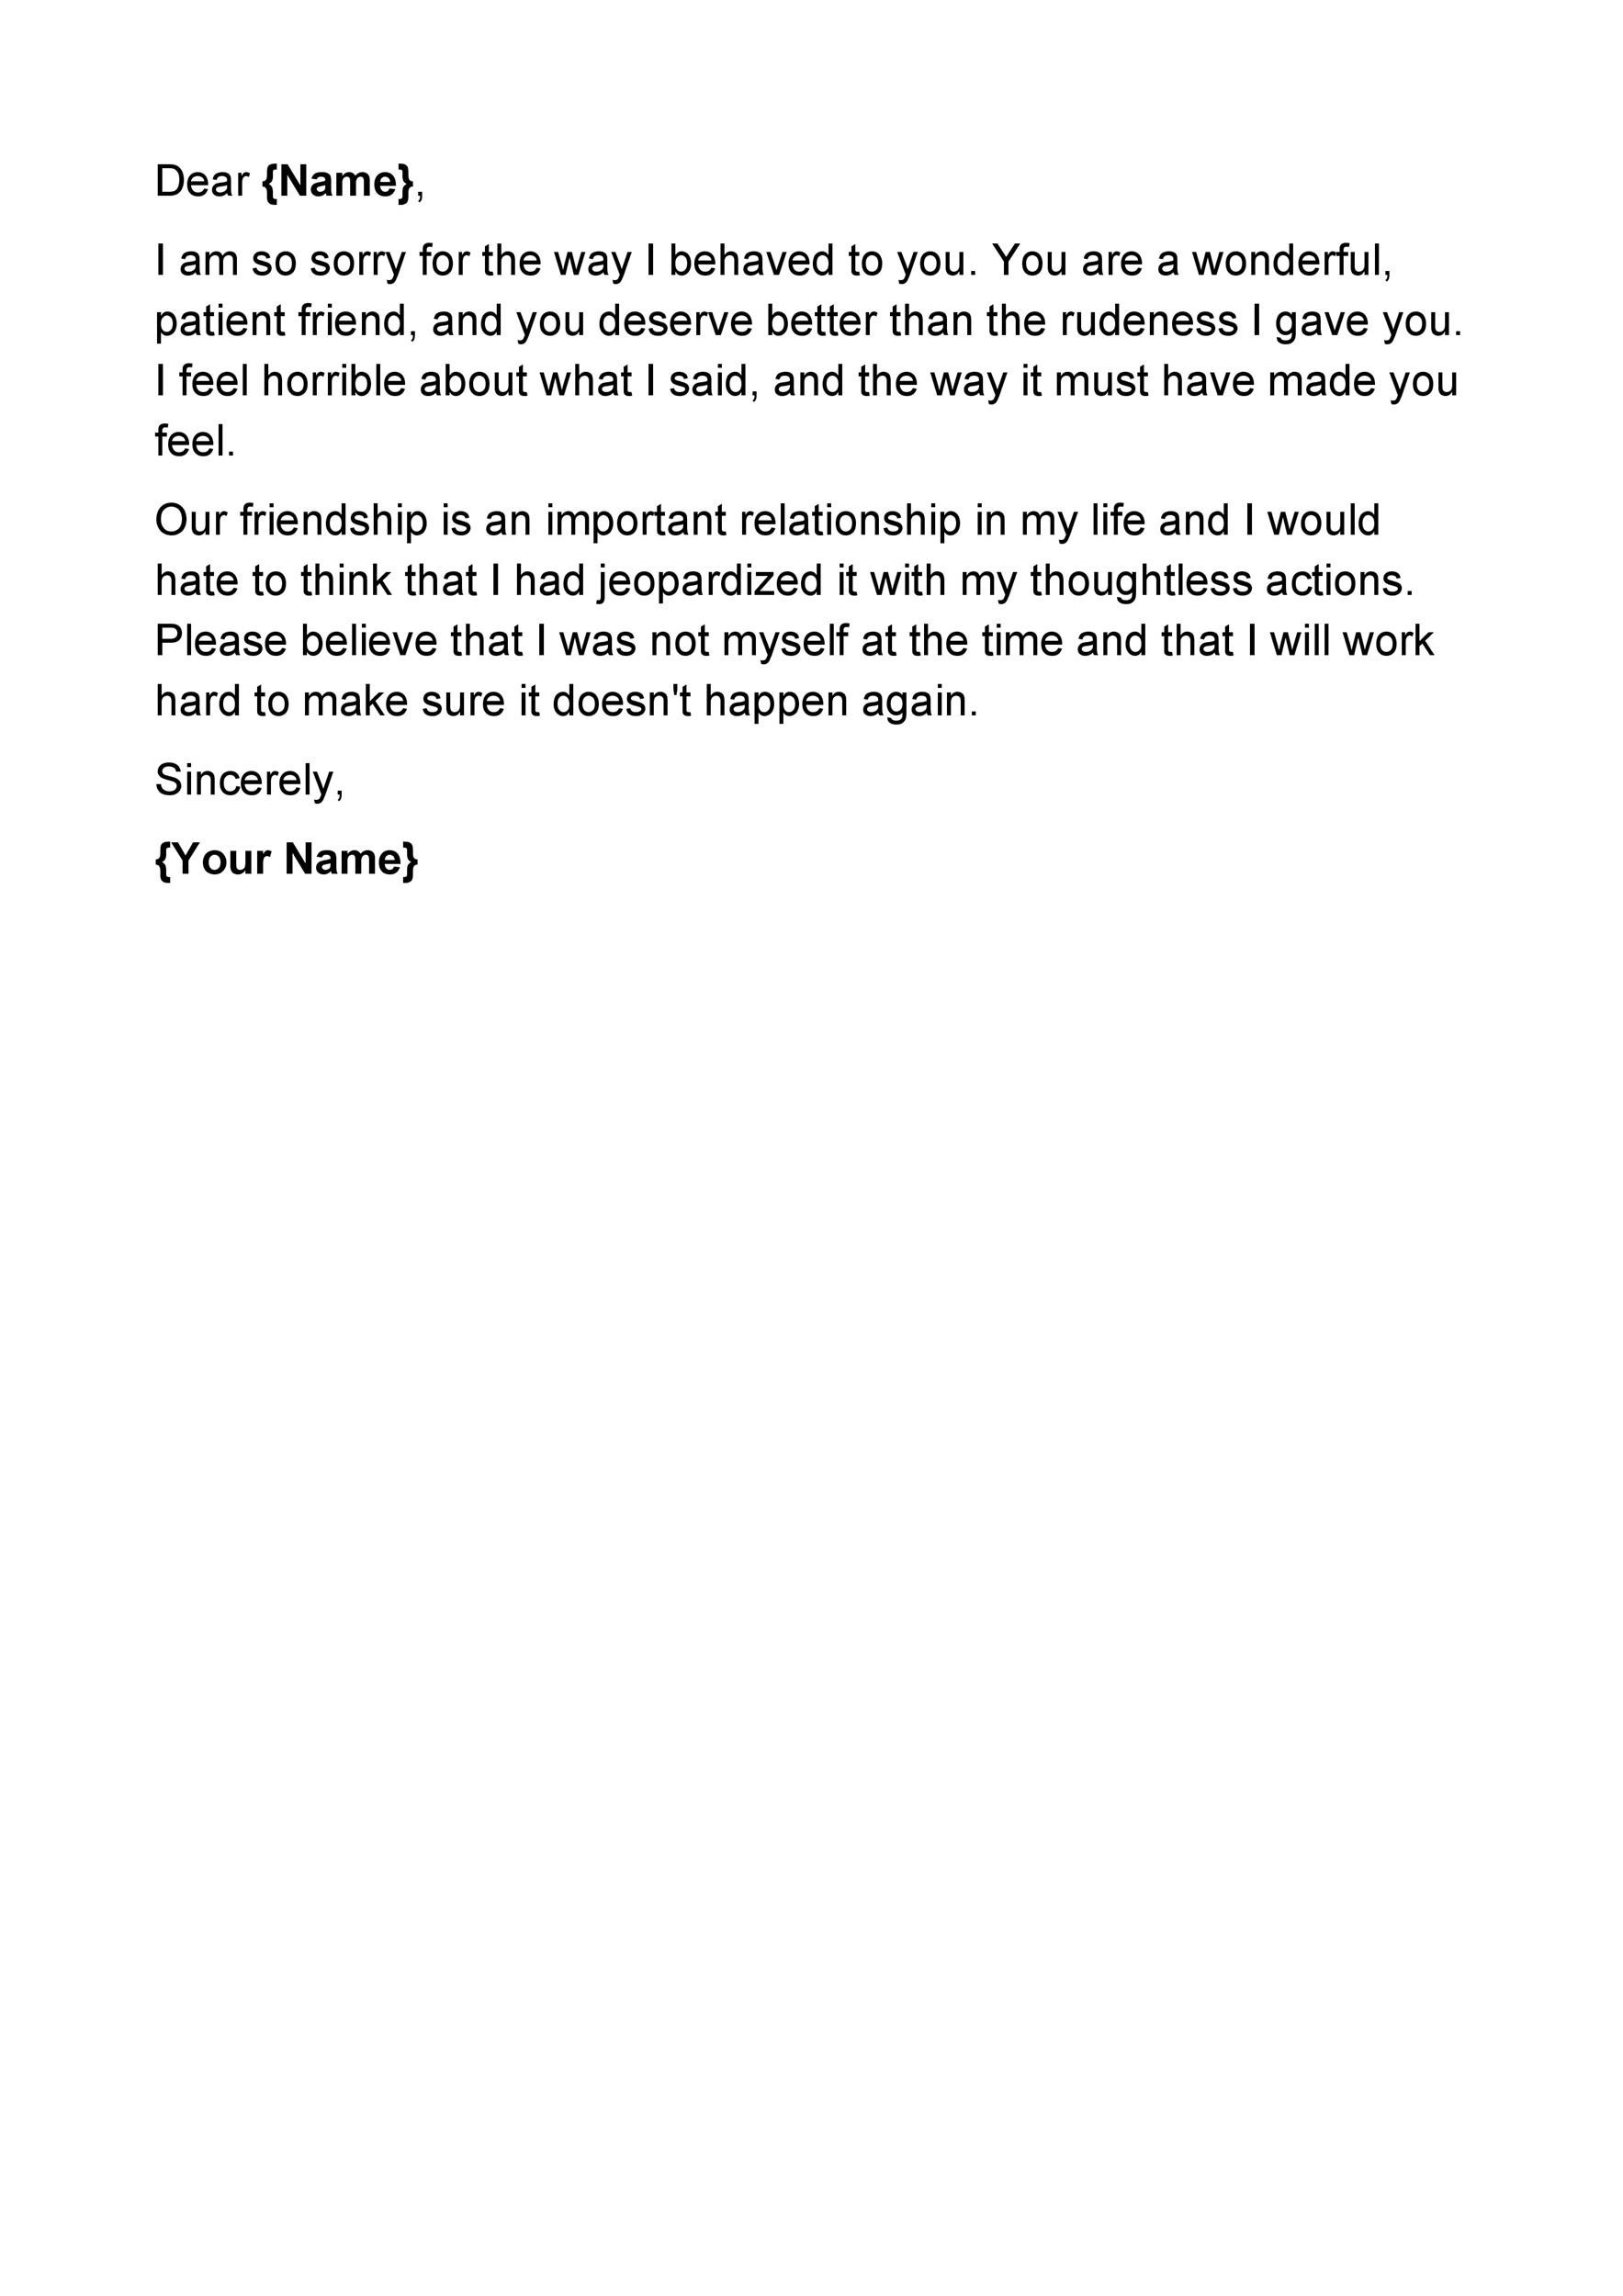 Free apology letter 38